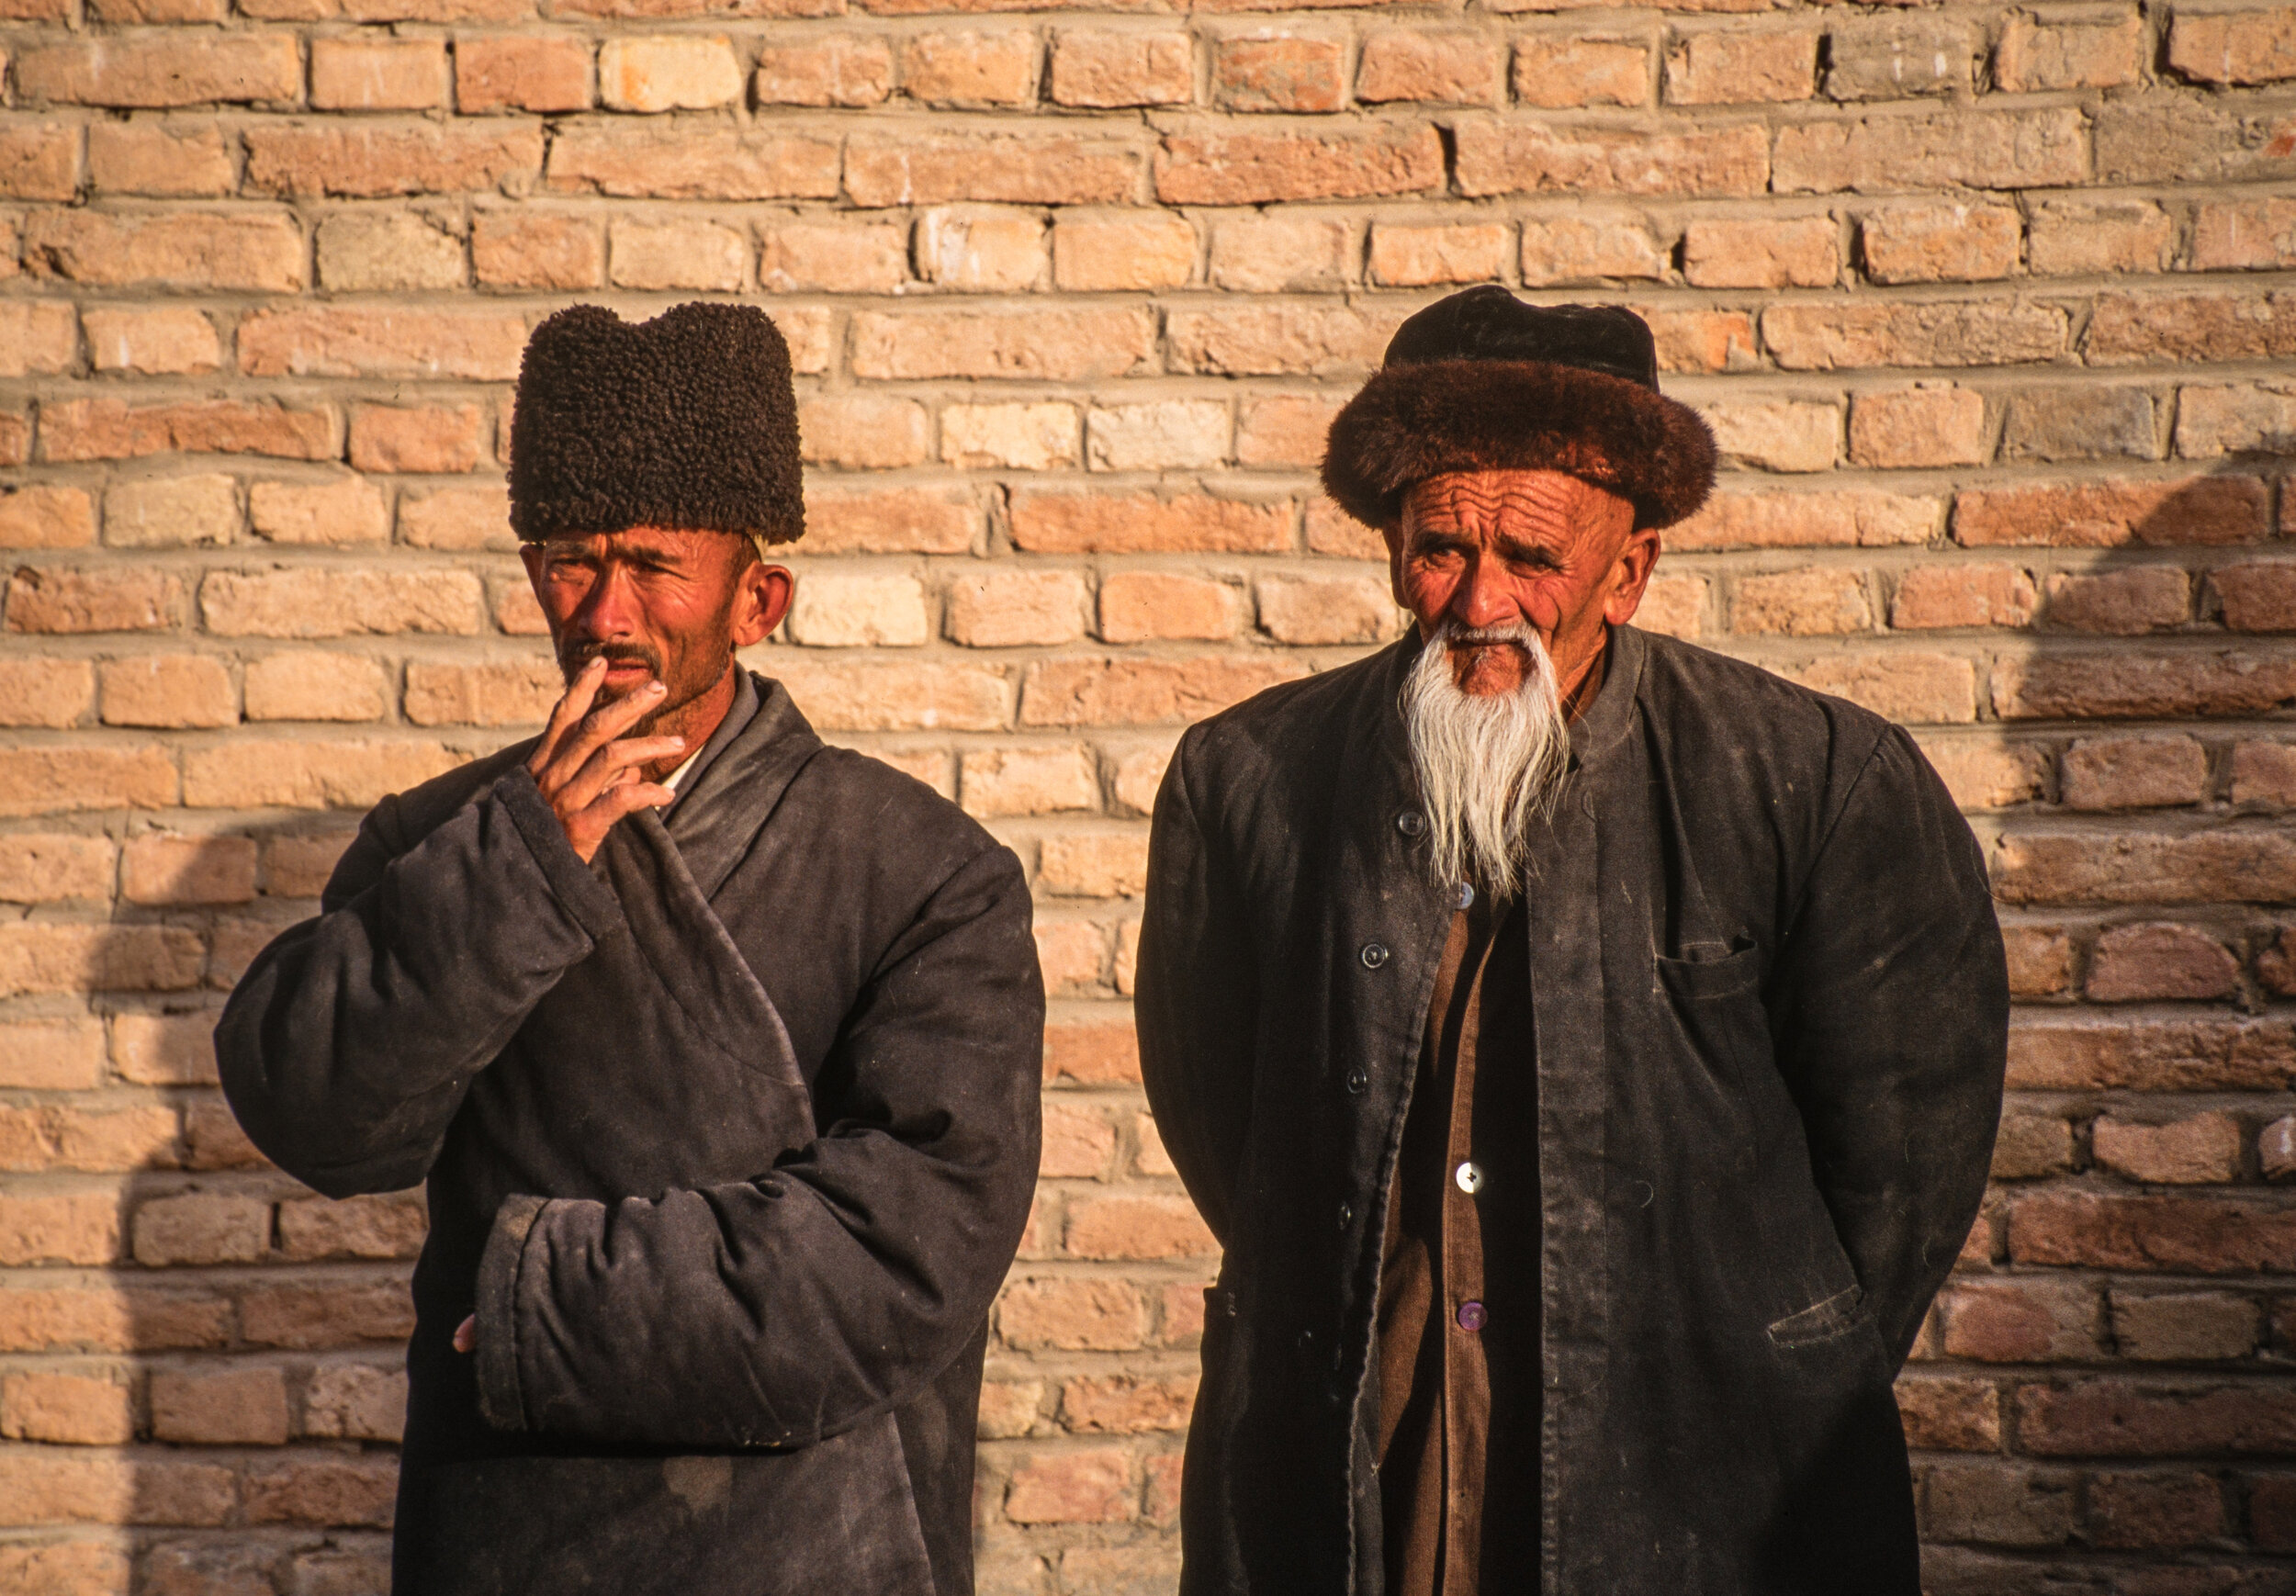  For the last photos in this blog I want to feature the locals from this region of the world. They are ethnically Uighurs who are Turkish descendants. Currently there is a struggle going on as the Chinese government is forcing them into internment ca